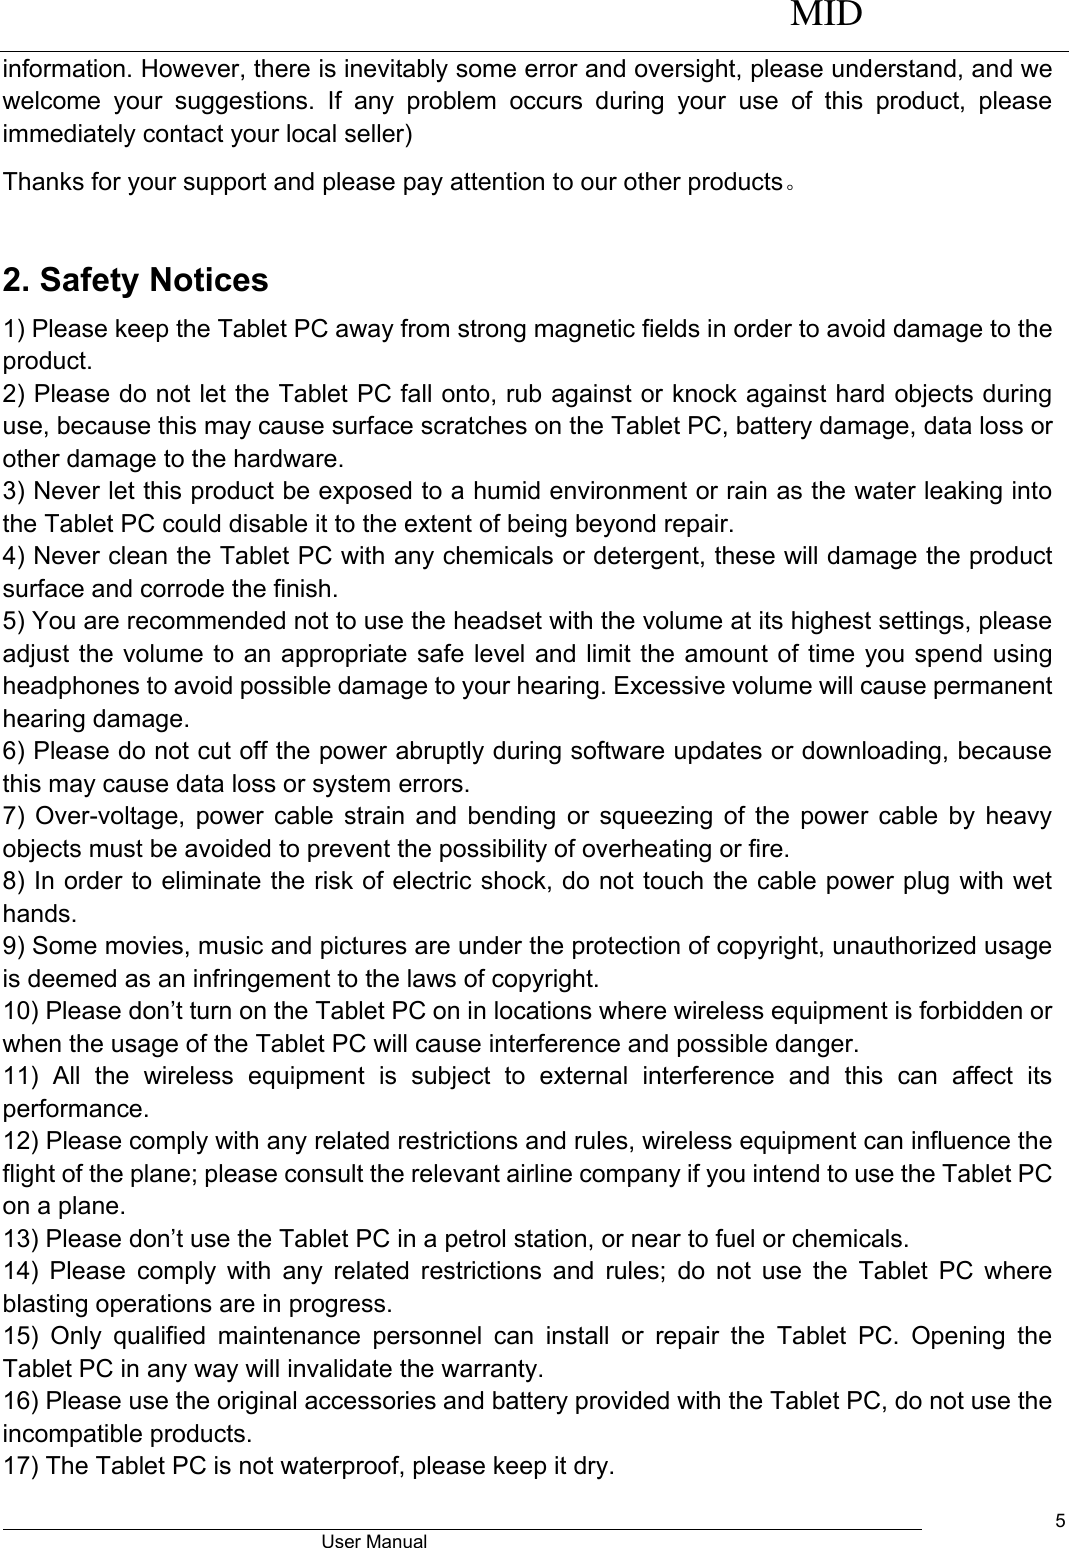      MID                                        User Manual     5 information. However, there is inevitably some error and oversight, please understand, and we welcome  your  suggestions.  If  any  problem  occurs  during  your  use  of  this  product,  please immediately contact your local seller) Thanks for your support and please pay attention to our other products。  2. Safety Notices 1) Please keep the Tablet PC away from strong magnetic fields in order to avoid damage to the product.   2) Please do not let the Tablet PC fall onto, rub against or knock against hard objects during use, because this may cause surface scratches on the Tablet PC, battery damage, data loss or other damage to the hardware.   3) Never let this product be exposed to a humid environment or rain as the water leaking into the Tablet PC could disable it to the extent of being beyond repair.   4) Never clean the Tablet PC with any chemicals or detergent, these will damage the product surface and corrode the finish.   5) You are recommended not to use the headset with the volume at its highest settings, please adjust the volume to an appropriate safe level and limit the amount of time you spend using headphones to avoid possible damage to your hearing. Excessive volume will cause permanent hearing damage.   6) Please do not cut off the power abruptly during software updates or downloading, because this may cause data loss or system errors. 7) Over-voltage, power cable strain and bending or squeezing of the power cable by heavy objects must be avoided to prevent the possibility of overheating or fire.   8) In order to eliminate the risk of electric shock, do not touch the cable power plug with wet hands.   9) Some movies, music and pictures are under the protection of copyright, unauthorized usage is deemed as an infringement to the laws of copyright.   10) Please don’t turn on the Tablet PC on in locations where wireless equipment is forbidden or when the usage of the Tablet PC will cause interference and possible danger.   11)  All  the  wireless  equipment  is  subject  to  external  interference  and  this  can  affect  its performance.   12) Please comply with any related restrictions and rules, wireless equipment can influence the flight of the plane; please consult the relevant airline company if you intend to use the Tablet PC on a plane.   13) Please don’t use the Tablet PC in a petrol station, or near to fuel or chemicals.   14) Please comply  with  any  related  restrictions and rules; do not use the  Tablet PC where blasting operations are in progress.   15)  Only  qualified  maintenance  personnel  can  install  or  repair  the  Tablet  PC.  Opening  the Tablet PC in any way will invalidate the warranty.   16) Please use the original accessories and battery provided with the Tablet PC, do not use the incompatible products.   17) The Tablet PC is not waterproof, please keep it dry.   